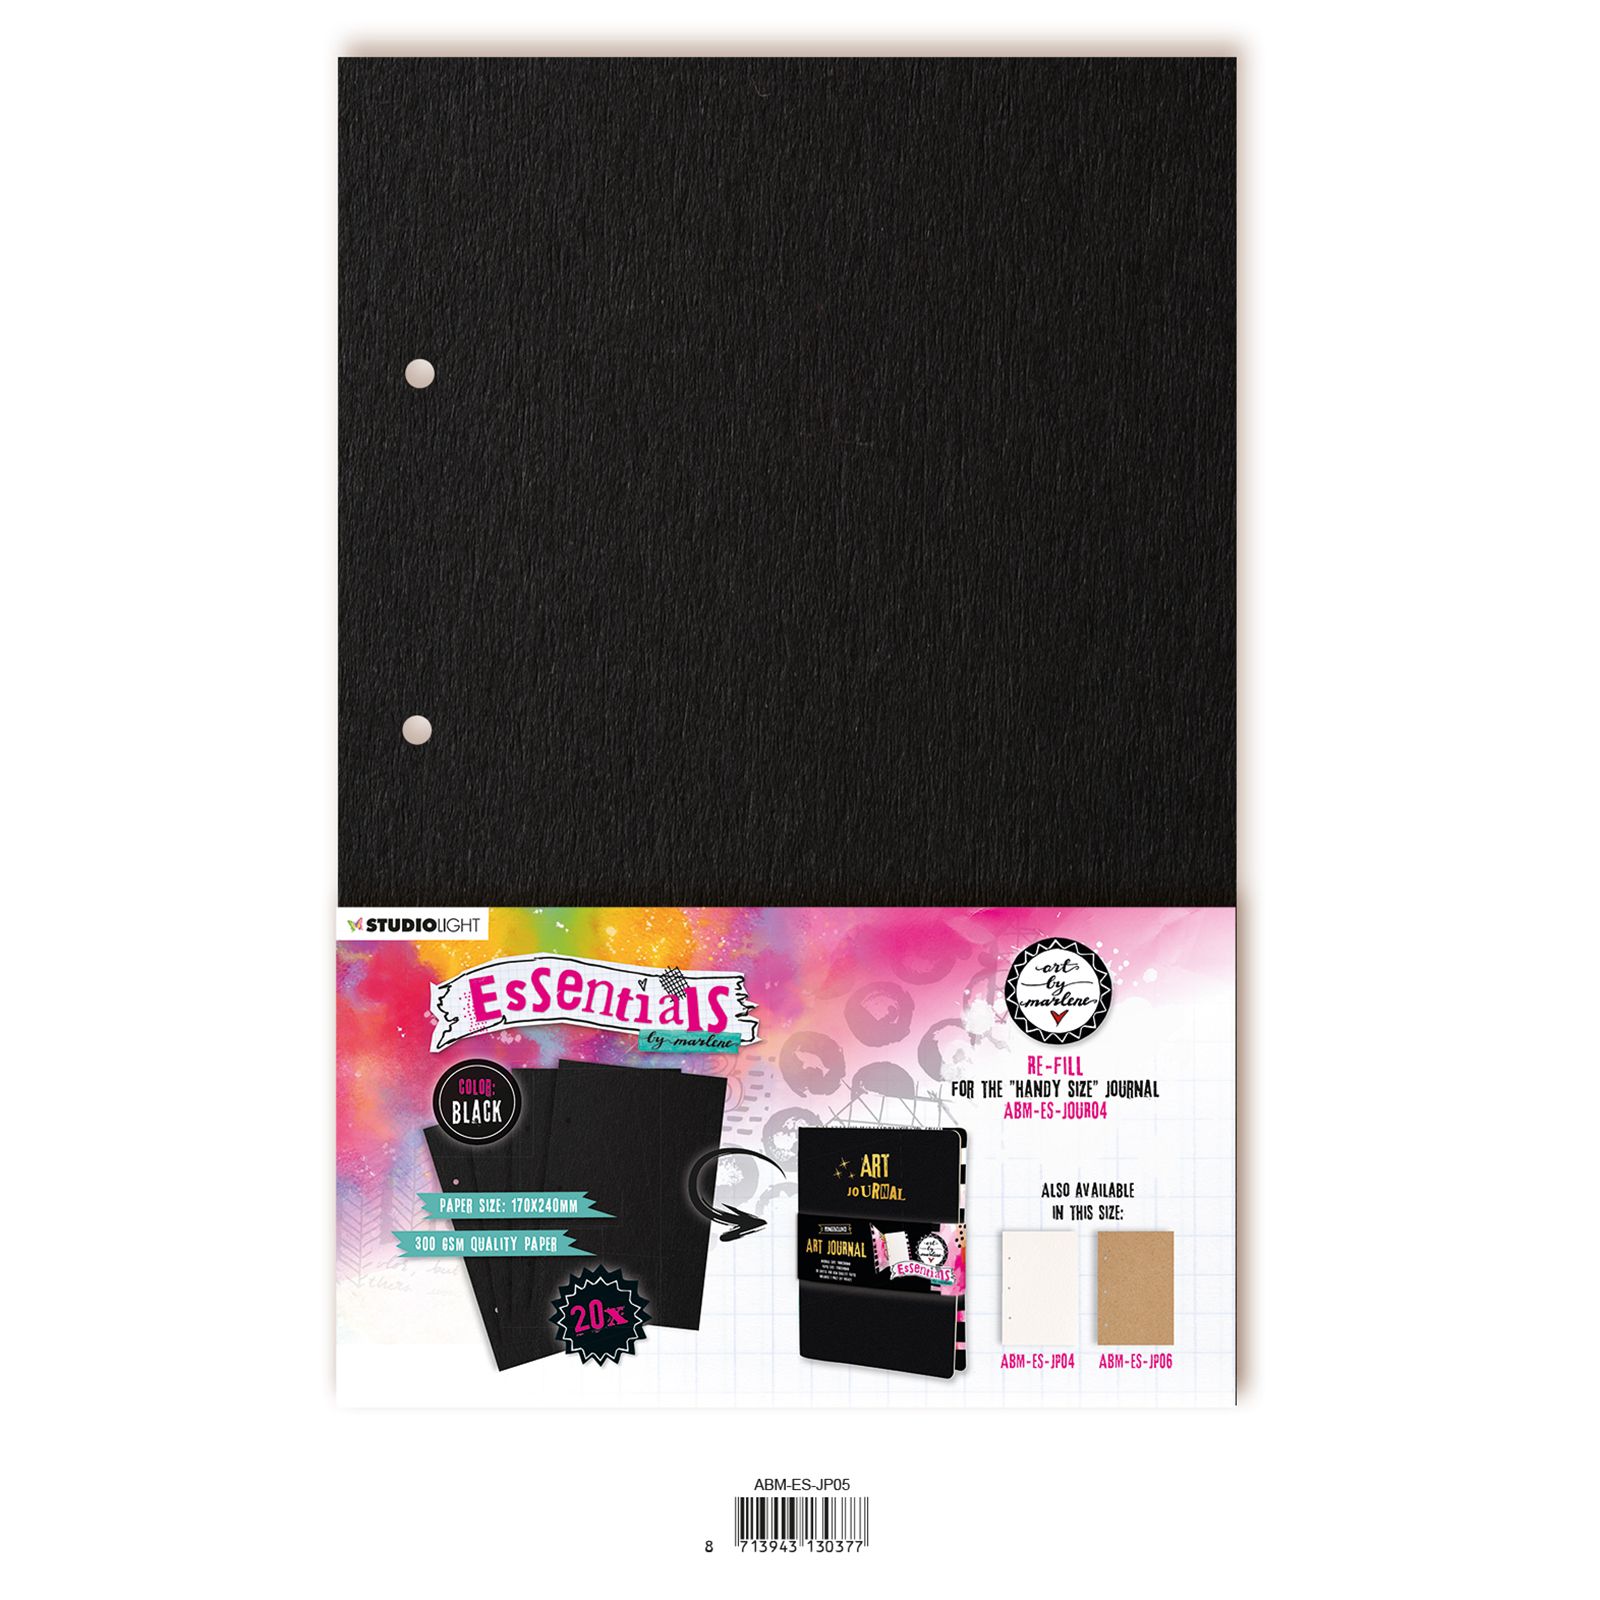 Studio Light • Essentials re-fill for The perfect size journal Black